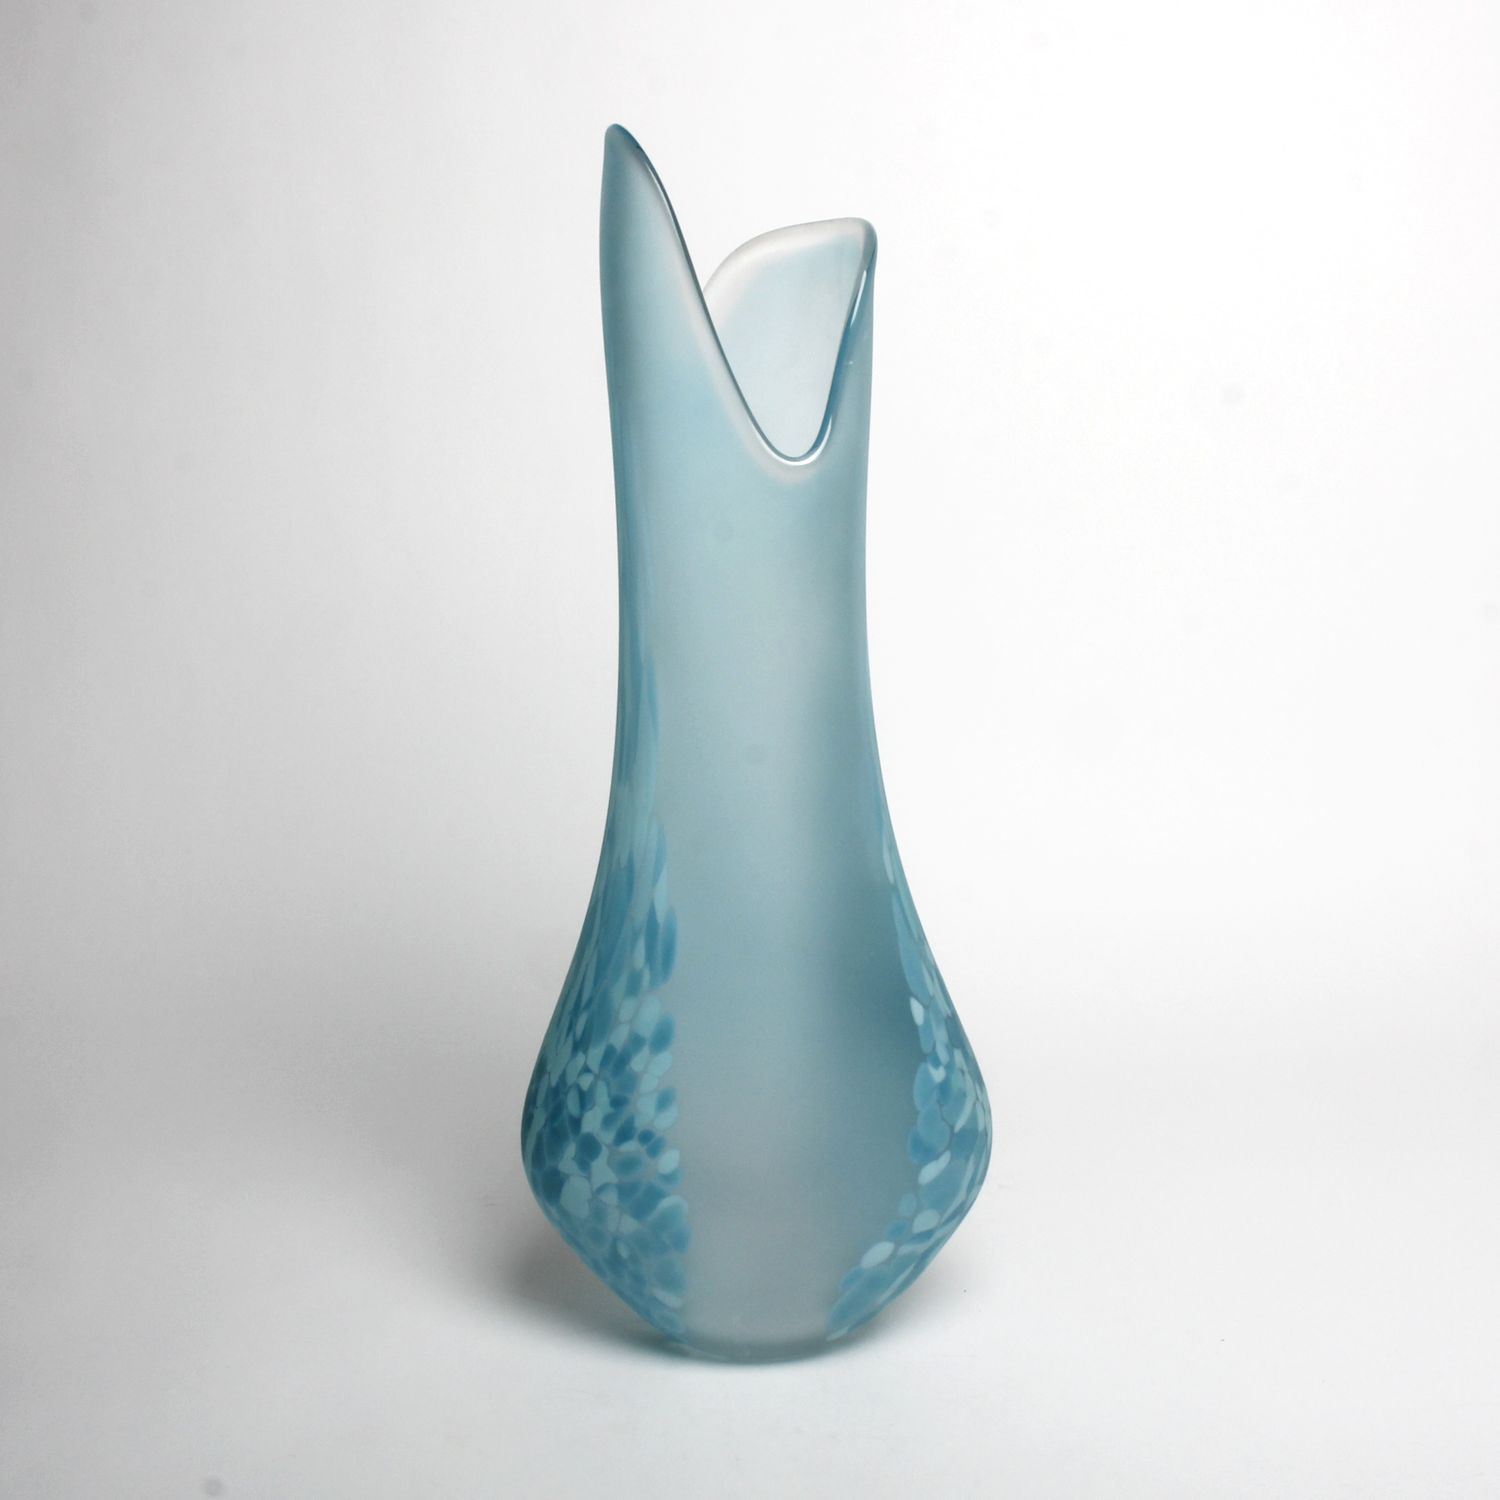 A&M Waddell Hunter: Large Flava Vase Product Image 6 of 6